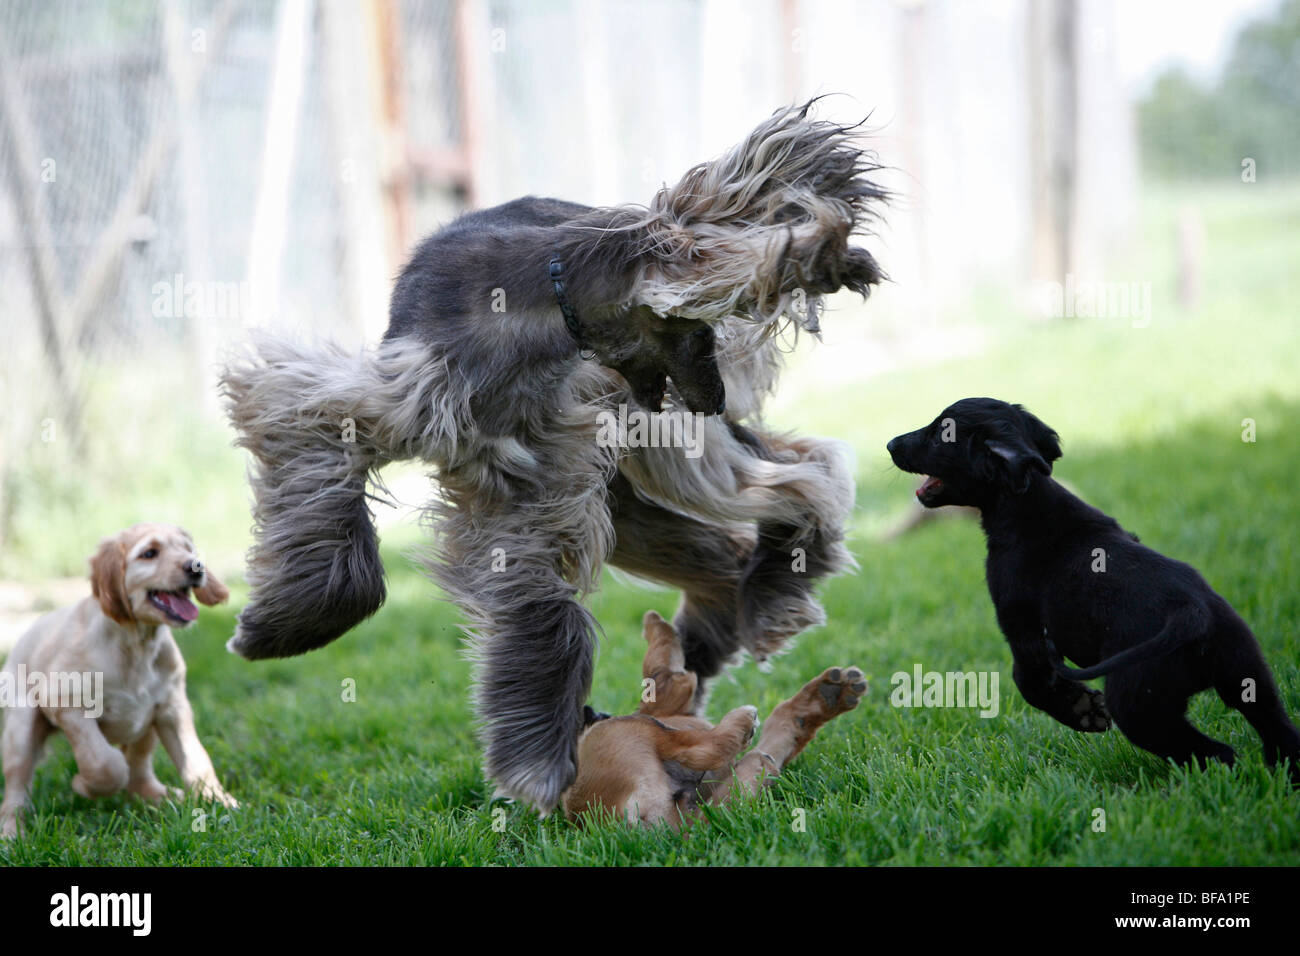 Afghanistan Hound, Afghan Hound (Canis lupus f. familiaris), puppies romping with their mother Stock Photo